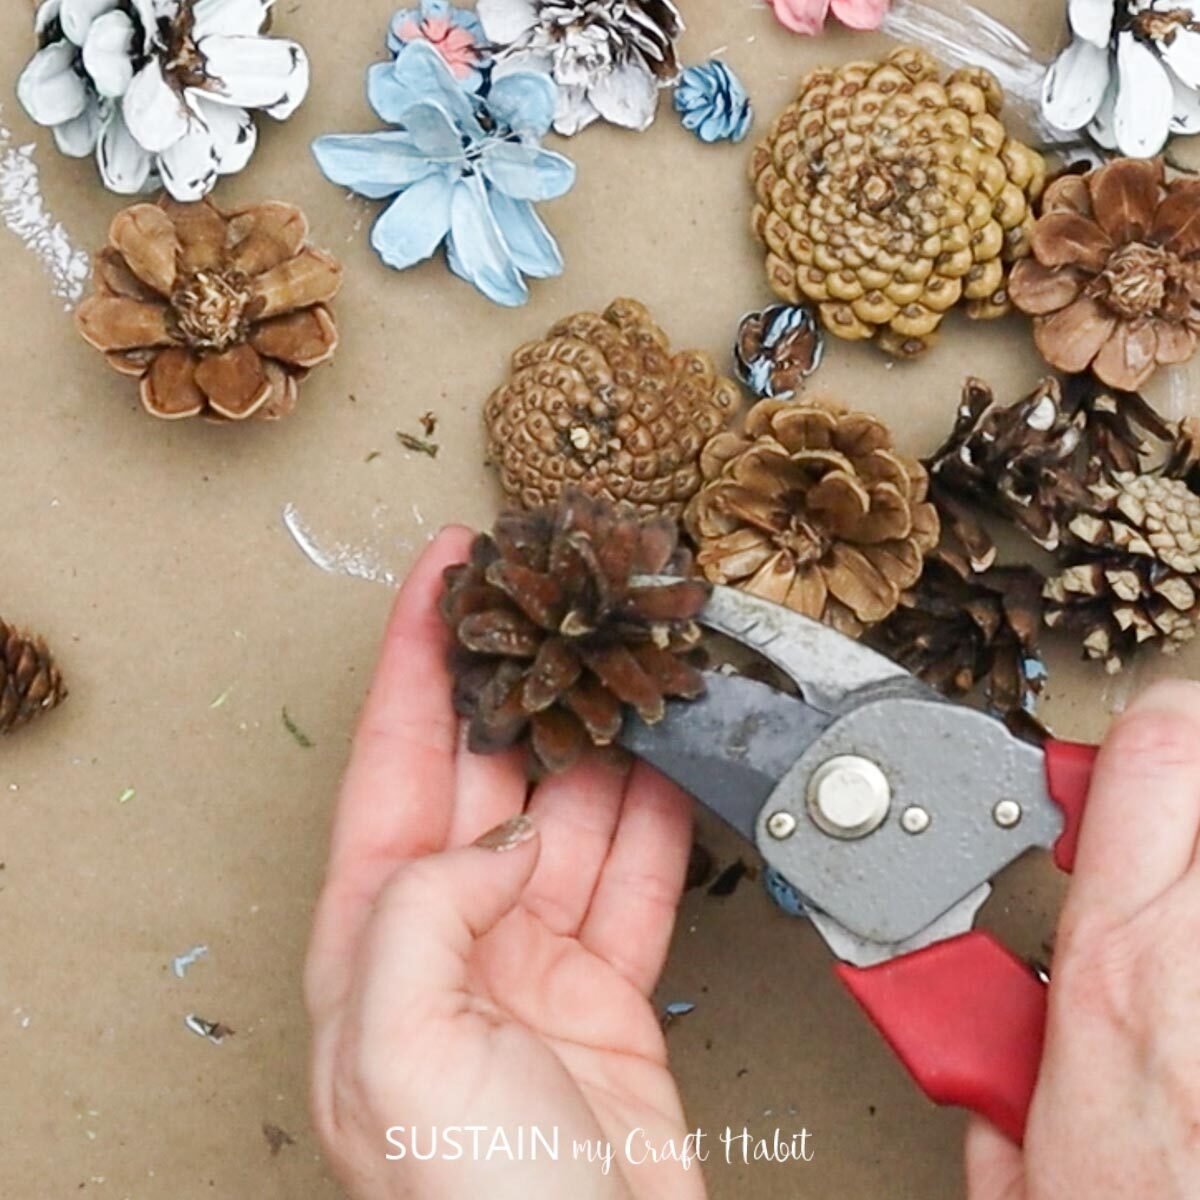 Cutting small pieces of pine cones with garden snips.